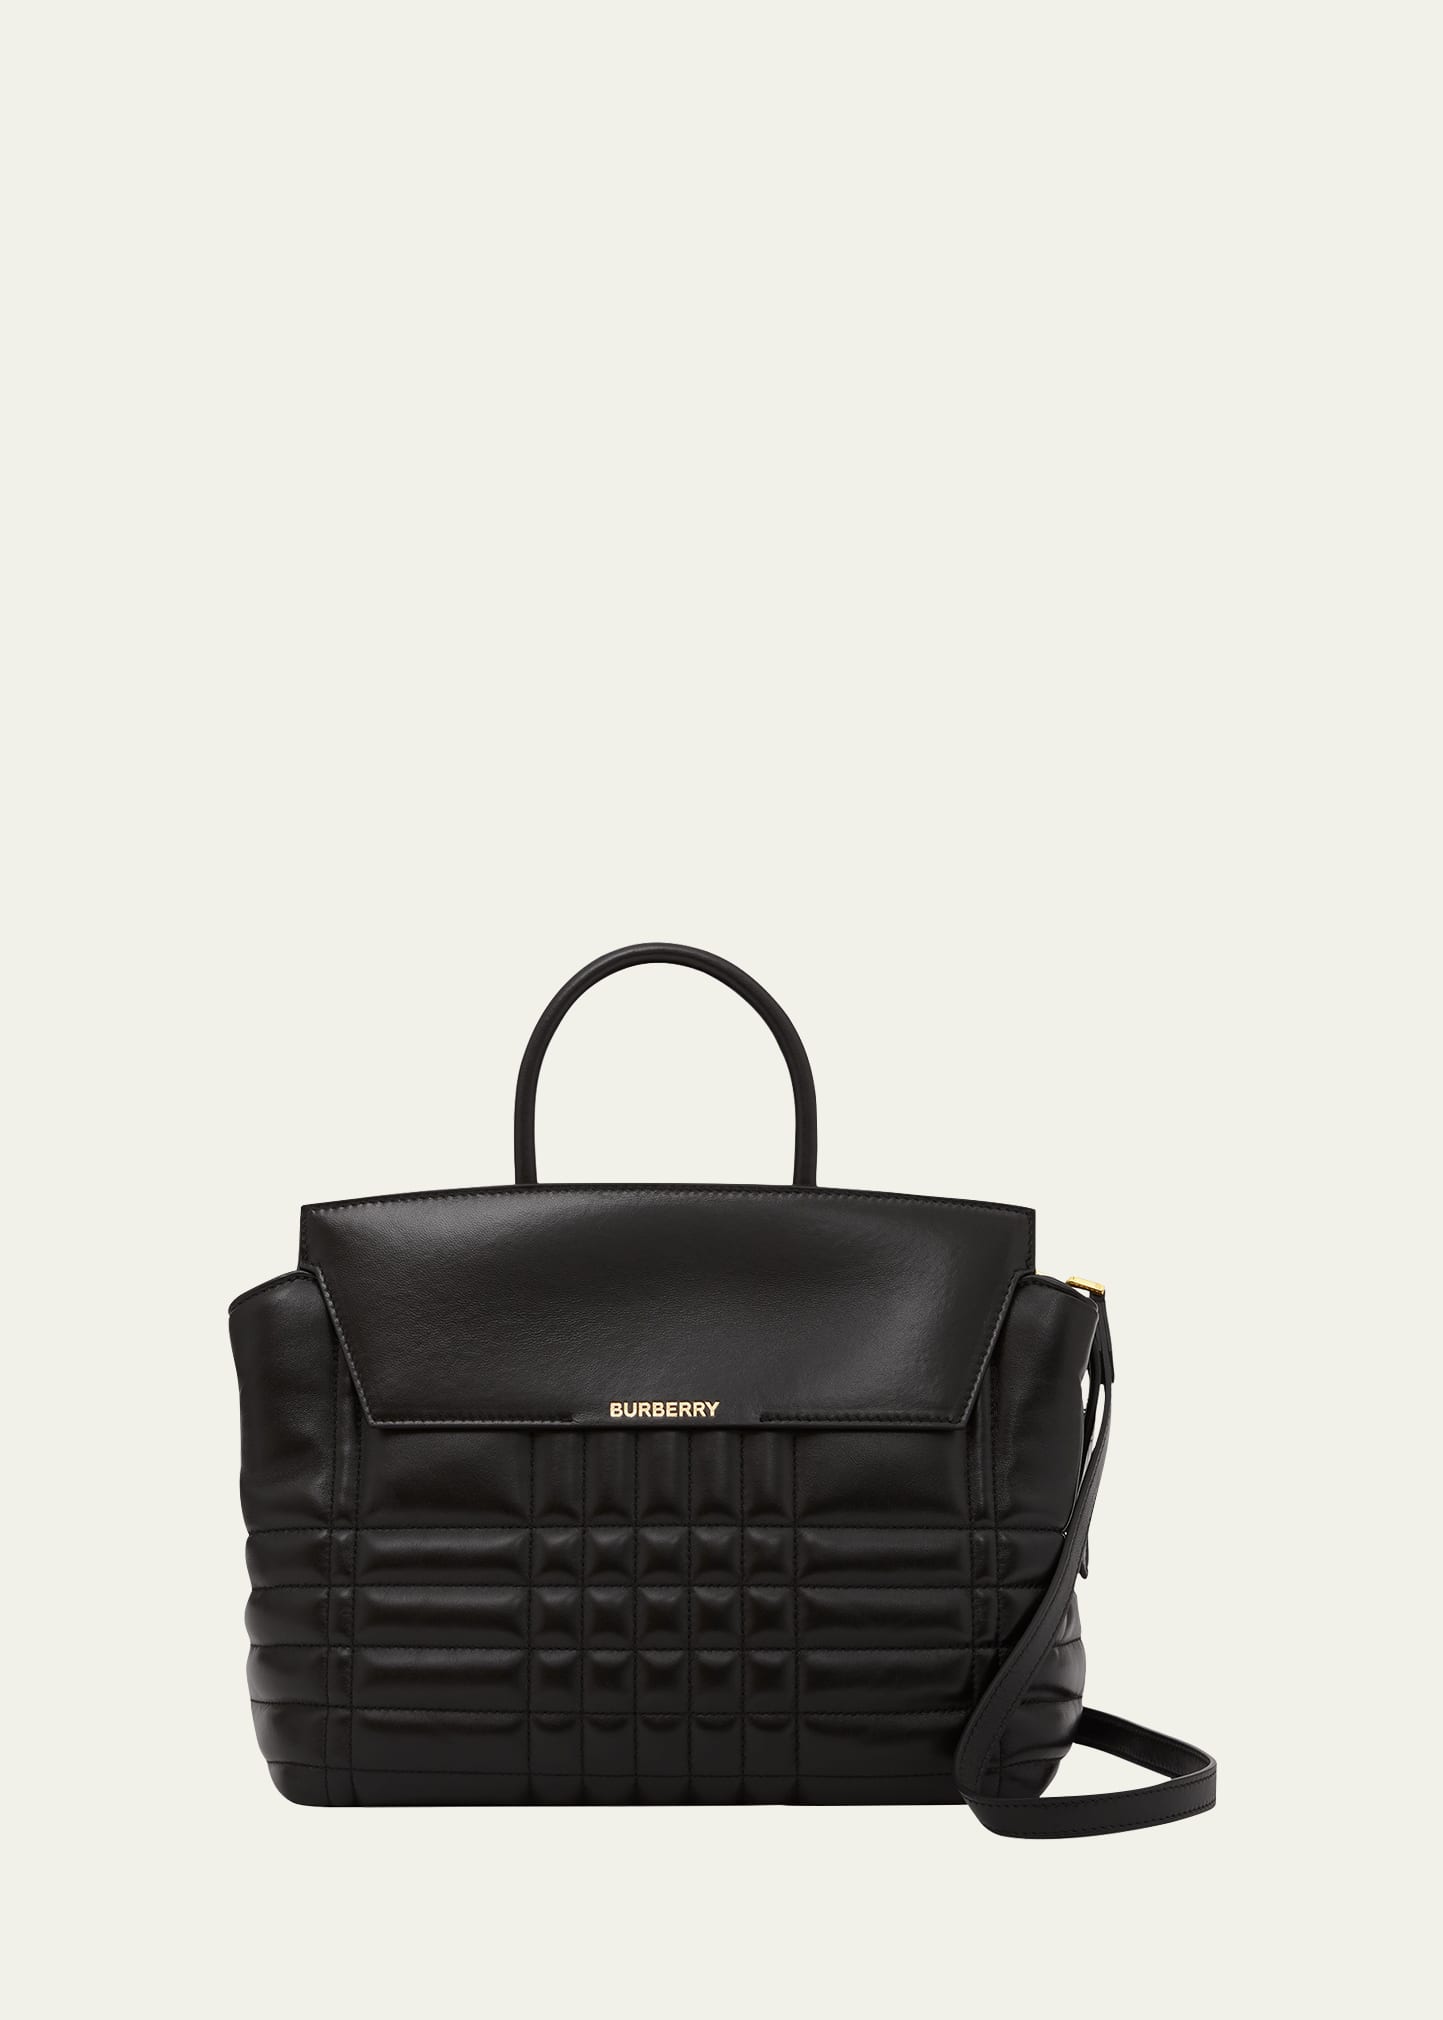 Burberry Catherine Medium Exploded Check Top-Handle Bag